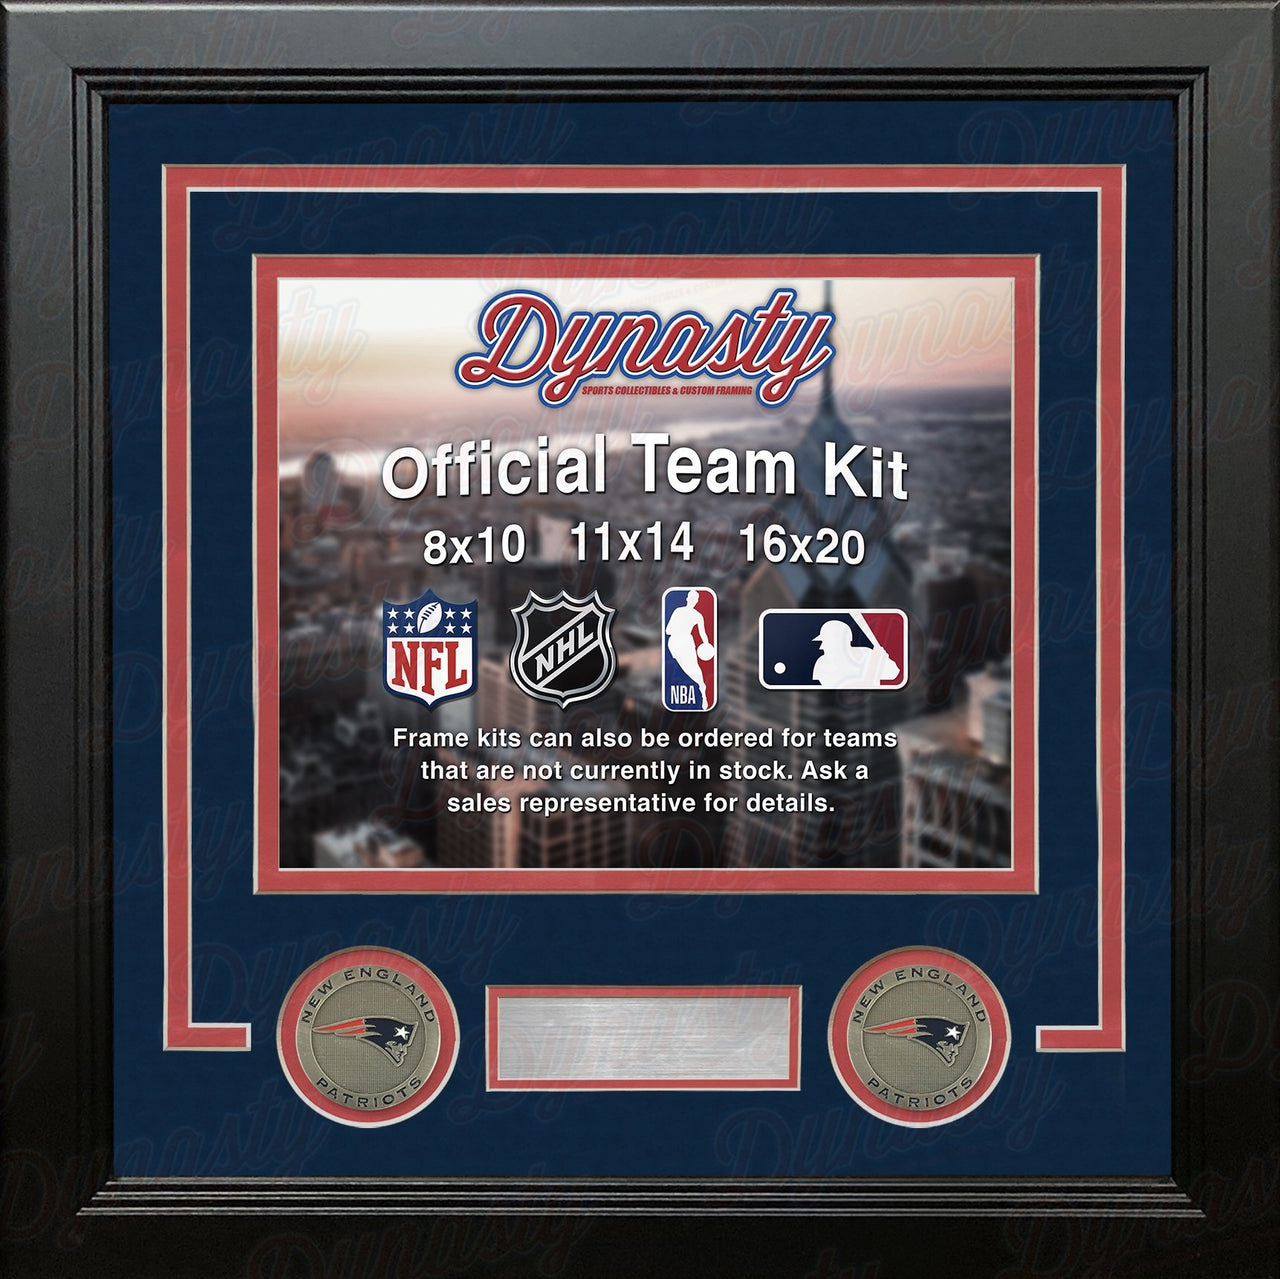 New England Patriots Custom NFL Football 16x20 Picture Frame Kit (Multiple Colors) - Dynasty Sports & Framing 